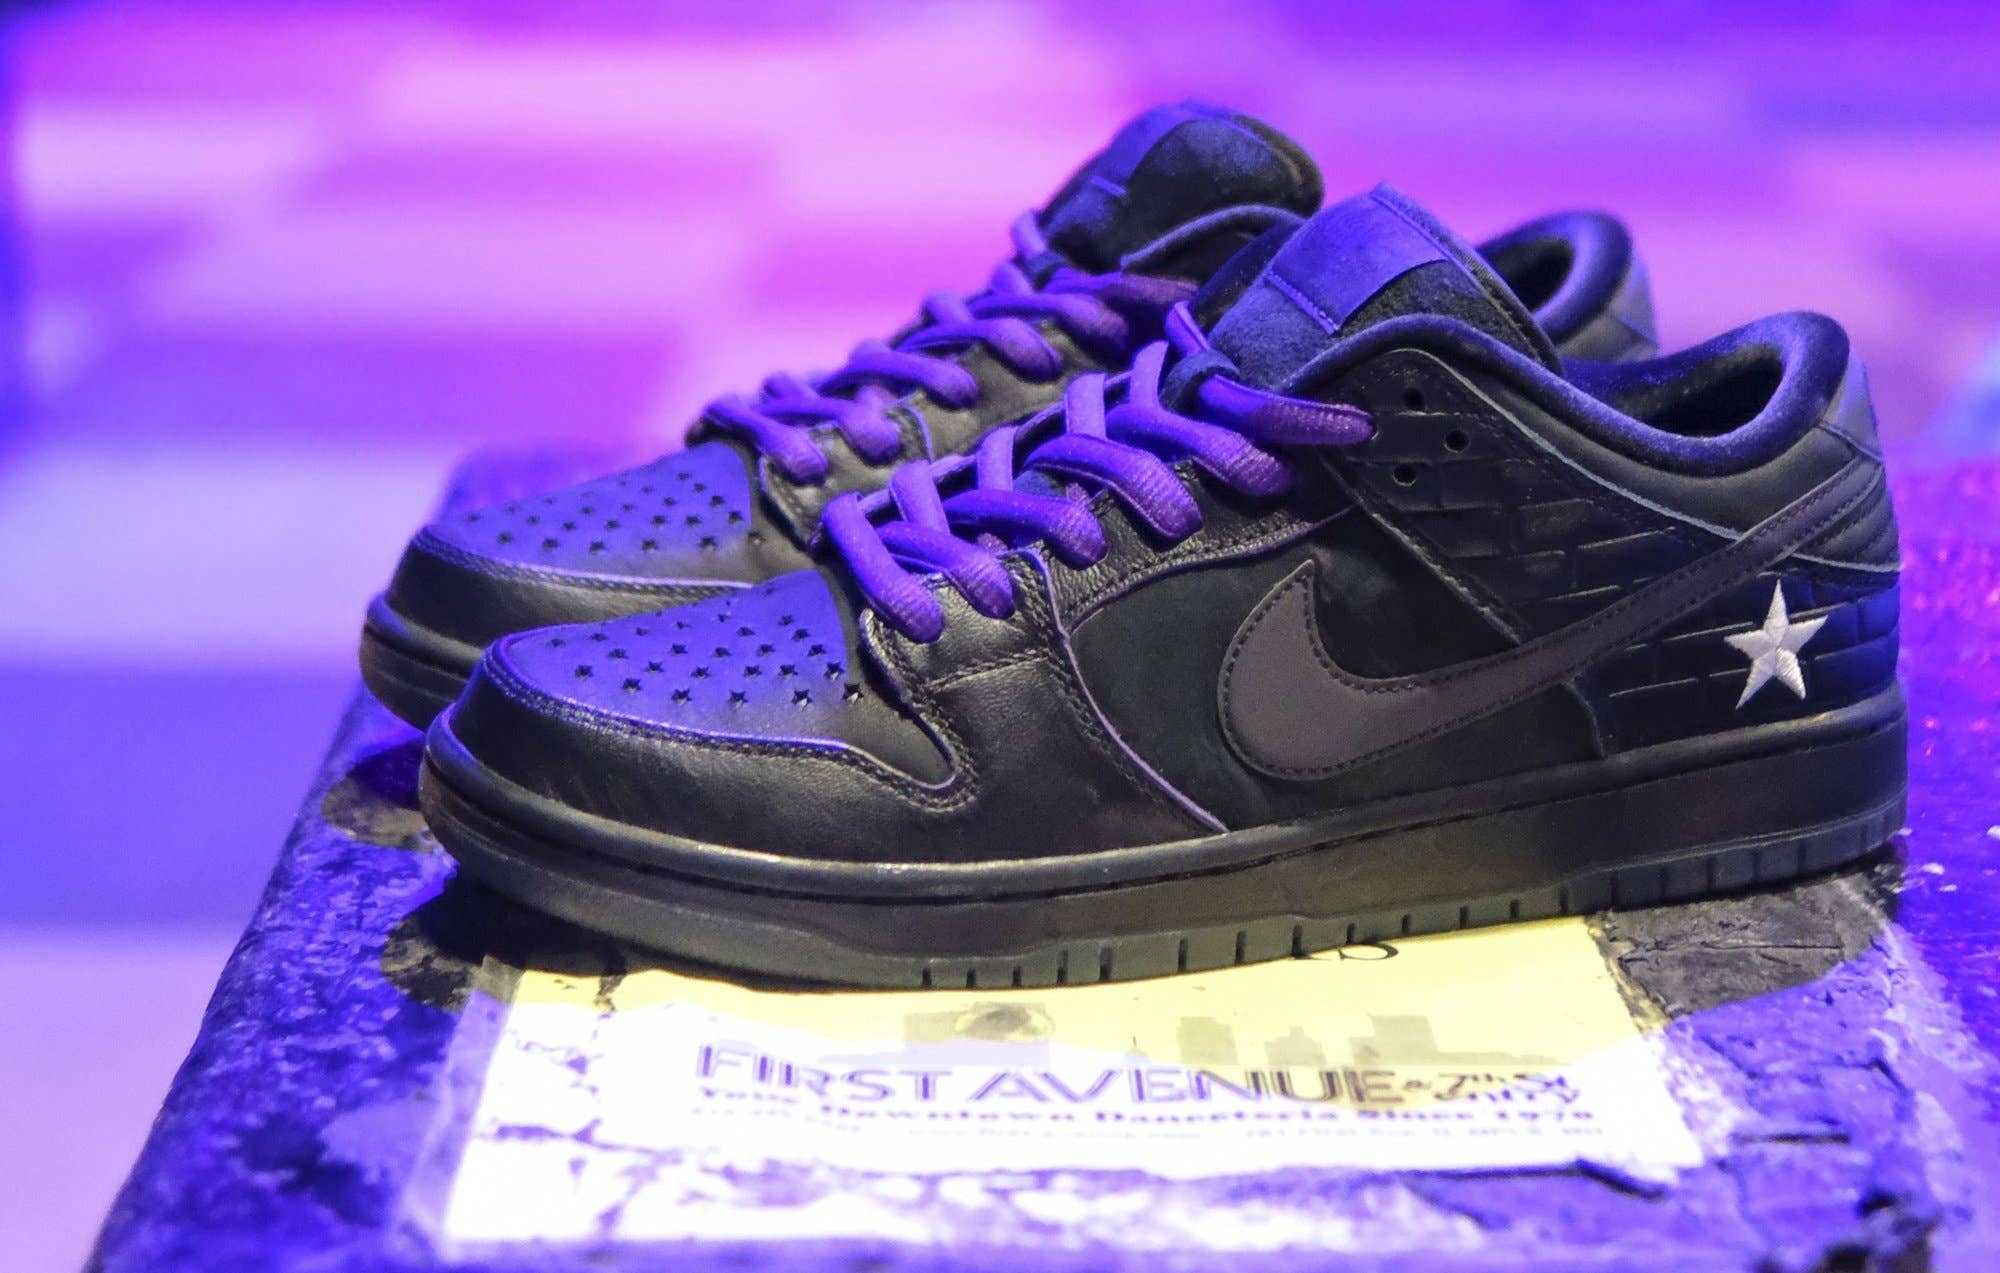 Familia x Nike SB Dunk Low 'First Avenue' Lateral